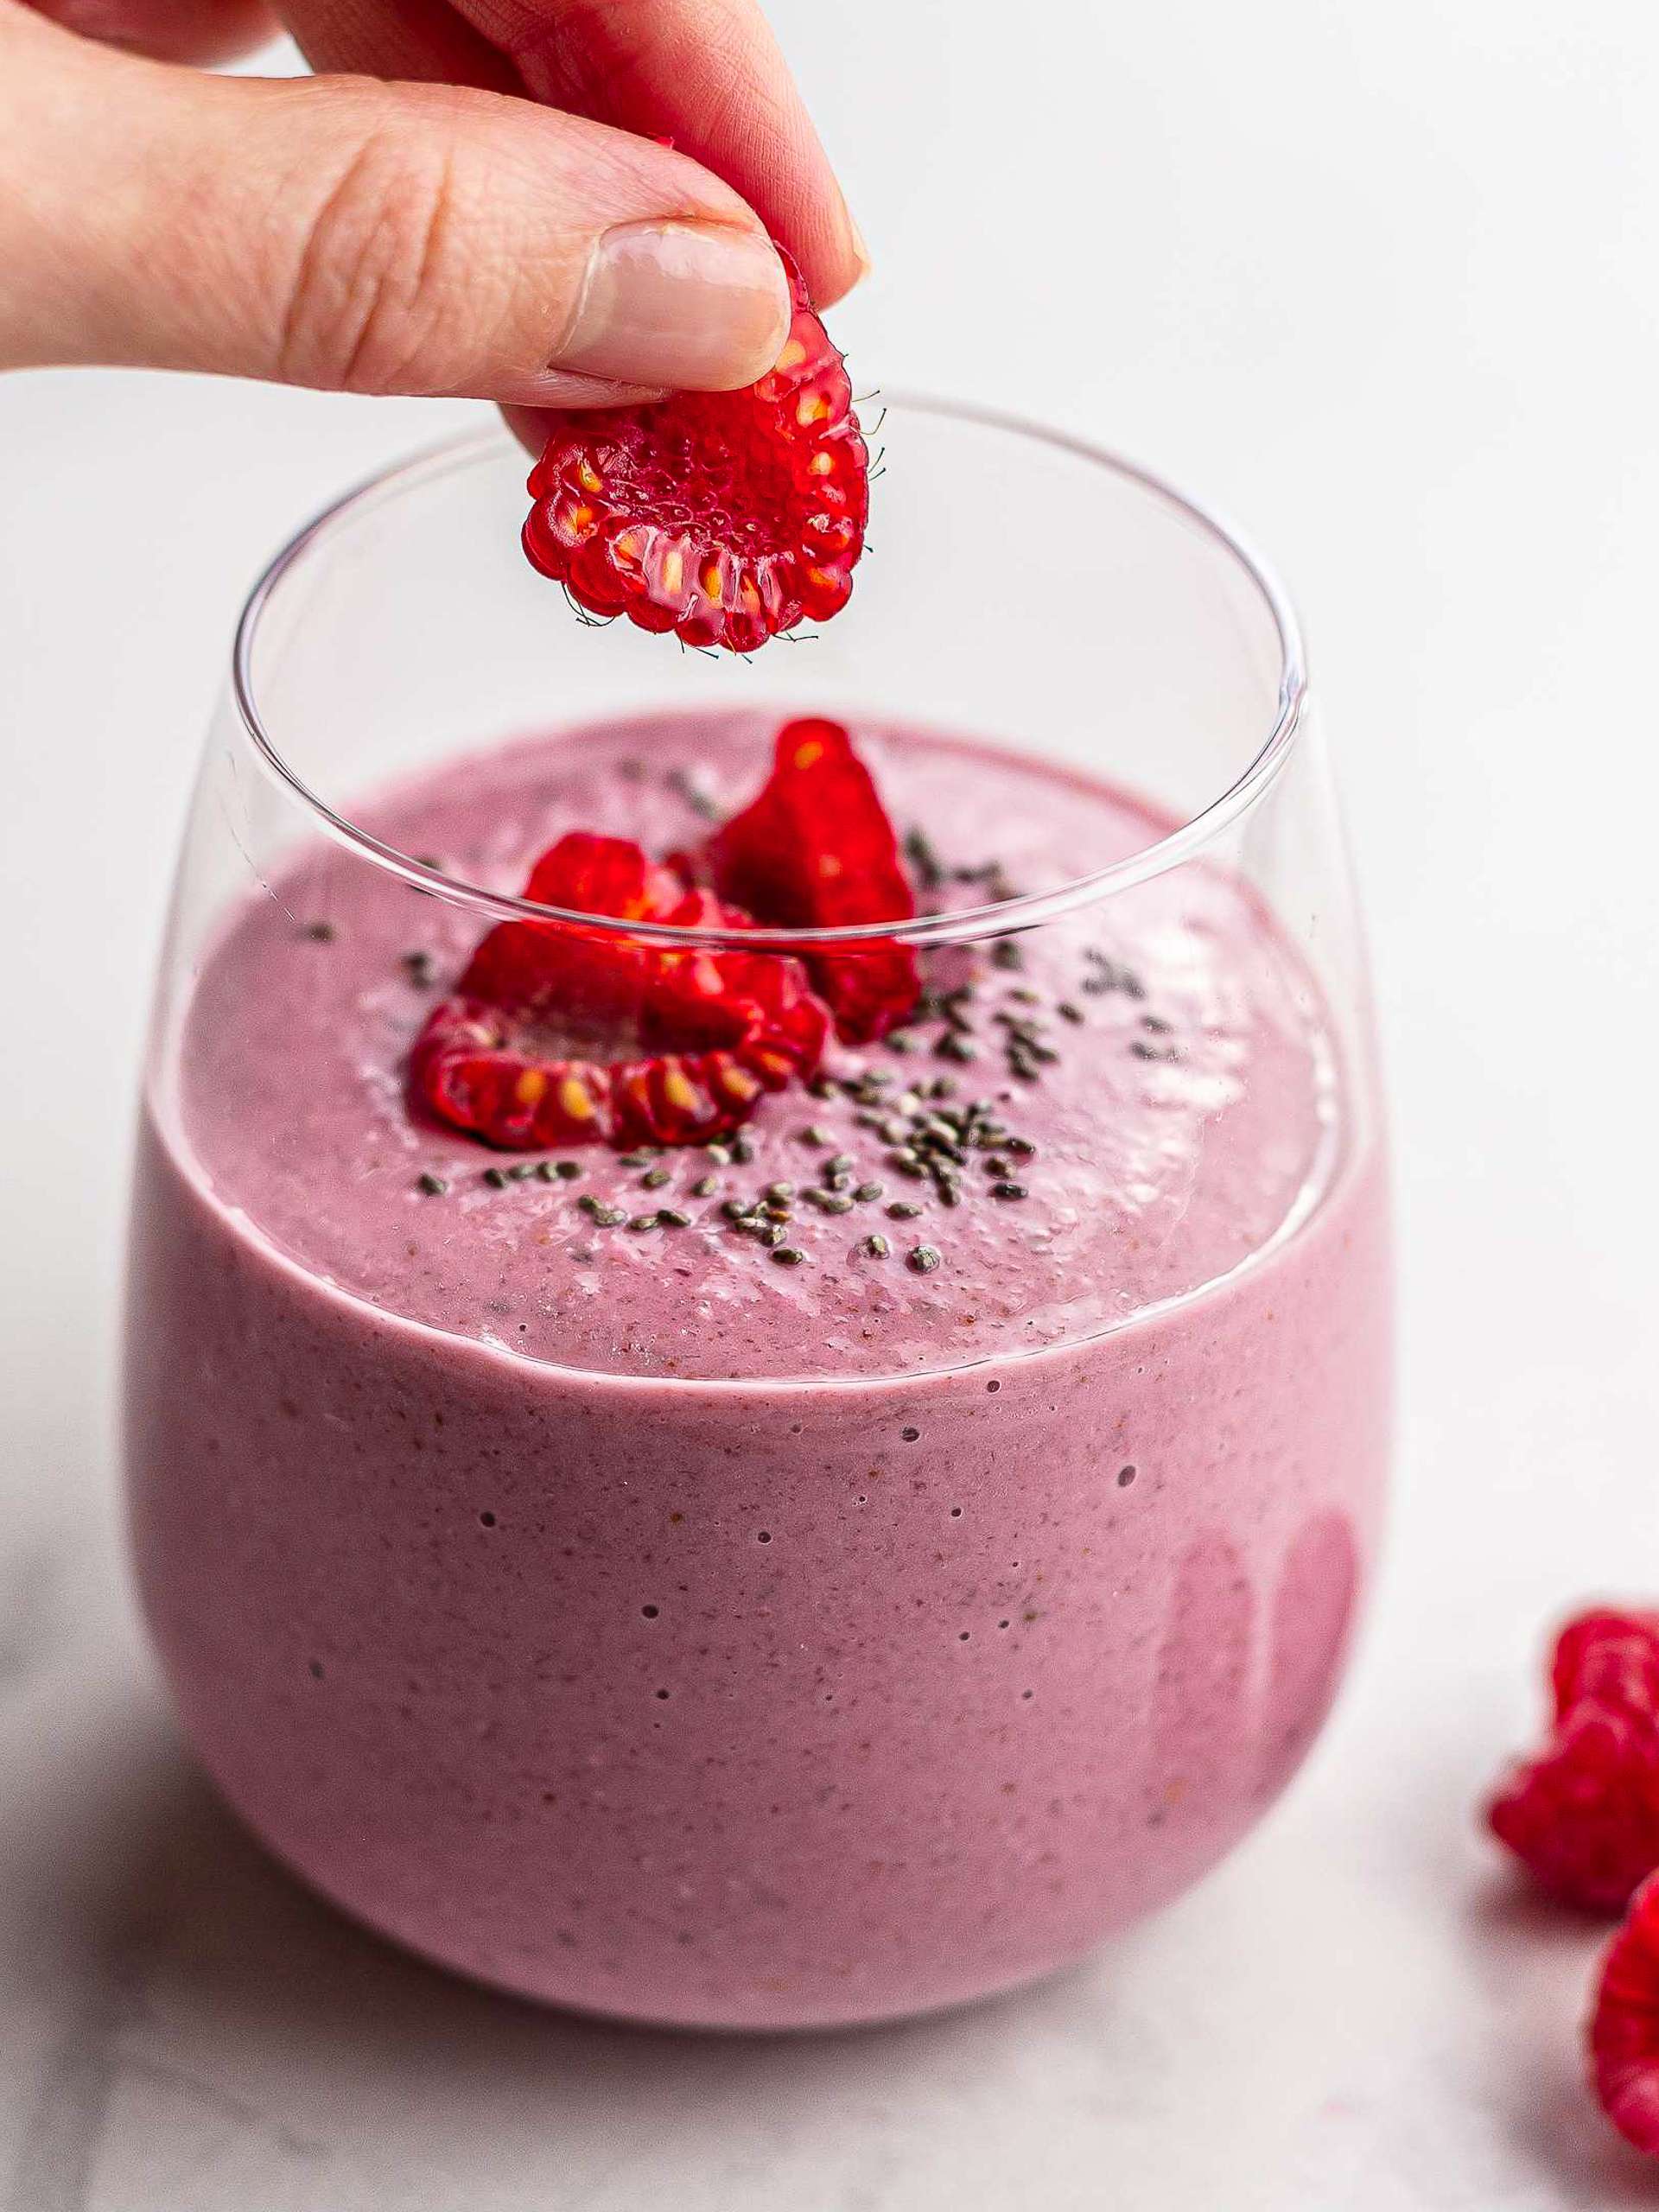 How to Build a Weight-Loss Smoothie